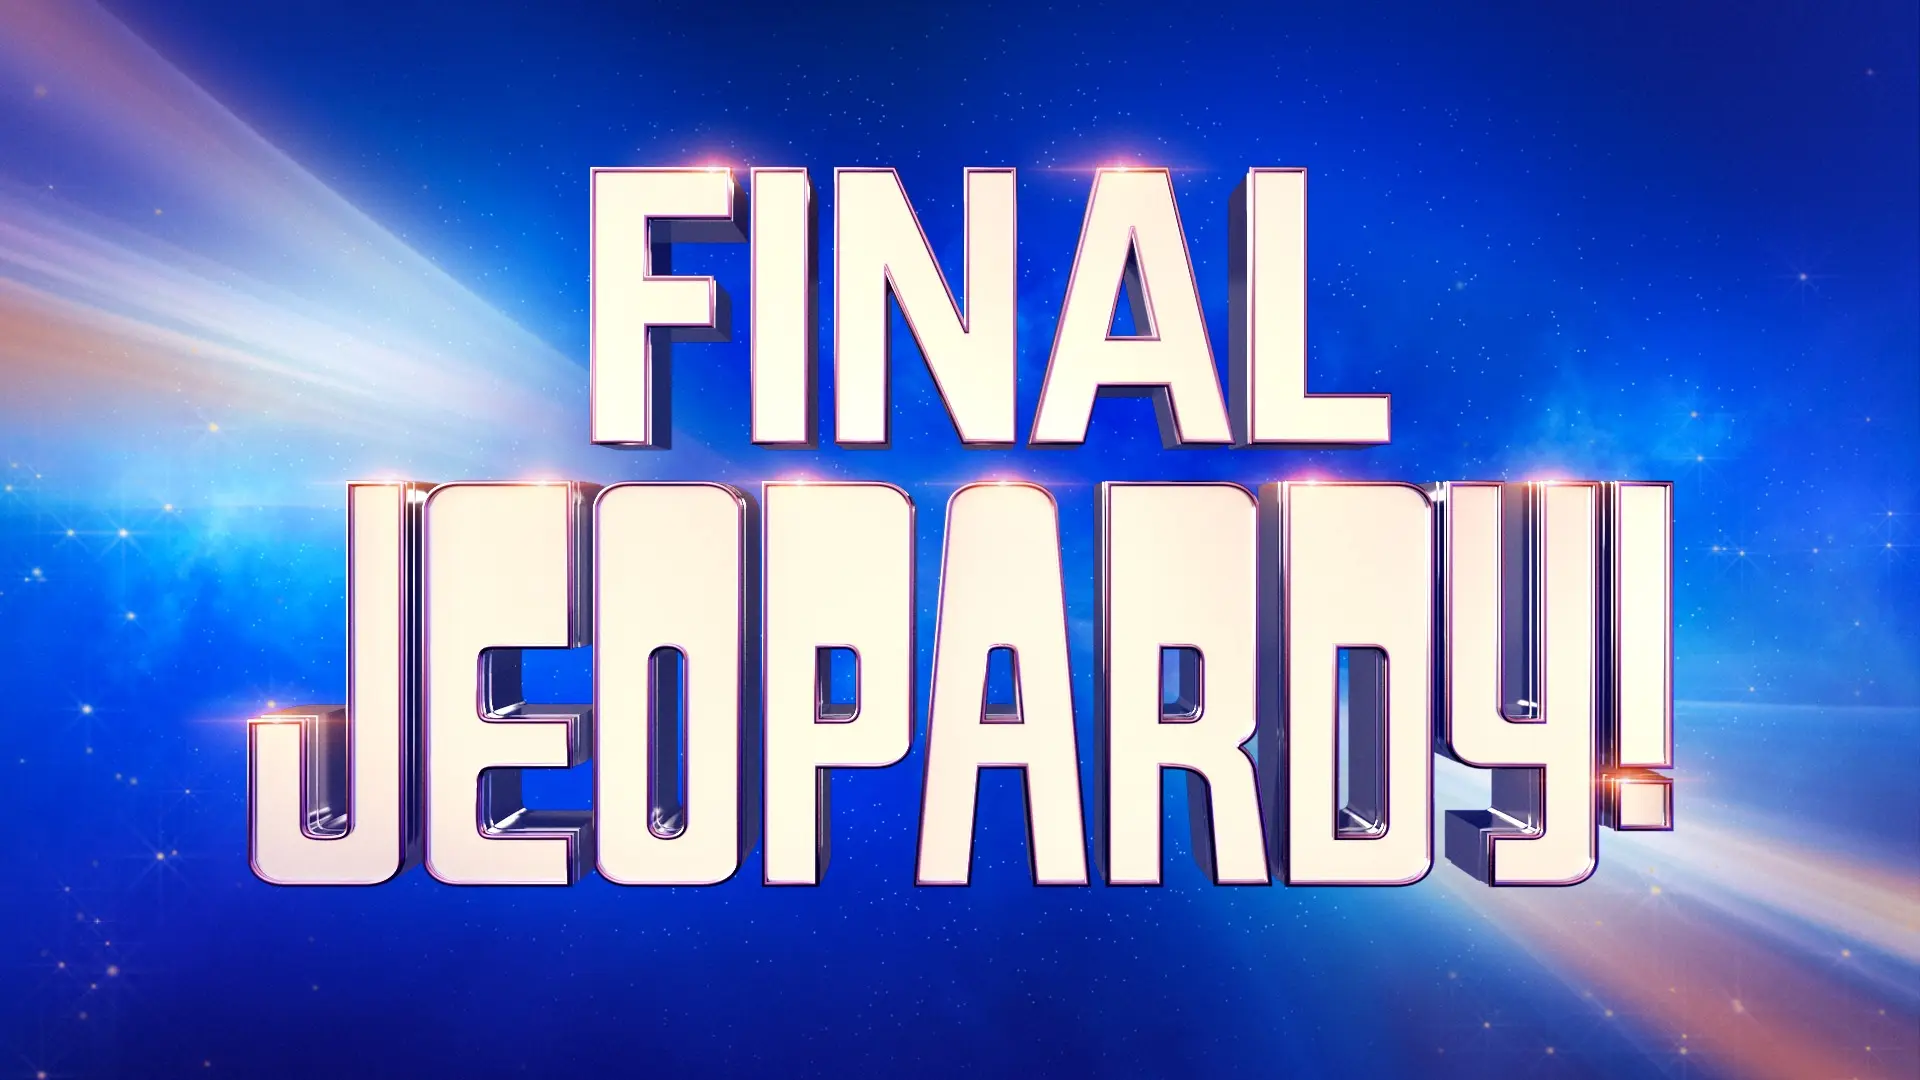 It was originally a code word used by telegraph operators Barack Obama used it in his Twitter handle Jeopardy Clue